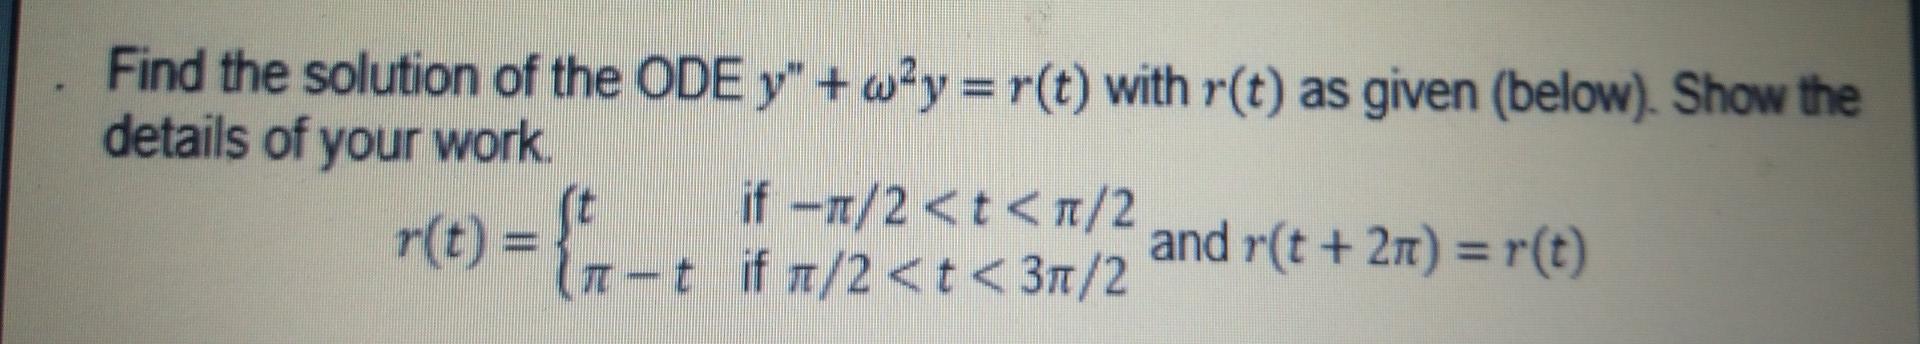 Find The Solution Of The Ode Y Wy R T With R T As Given Below Show The Details Of Your Work If 1 2 T N 2 And R 1